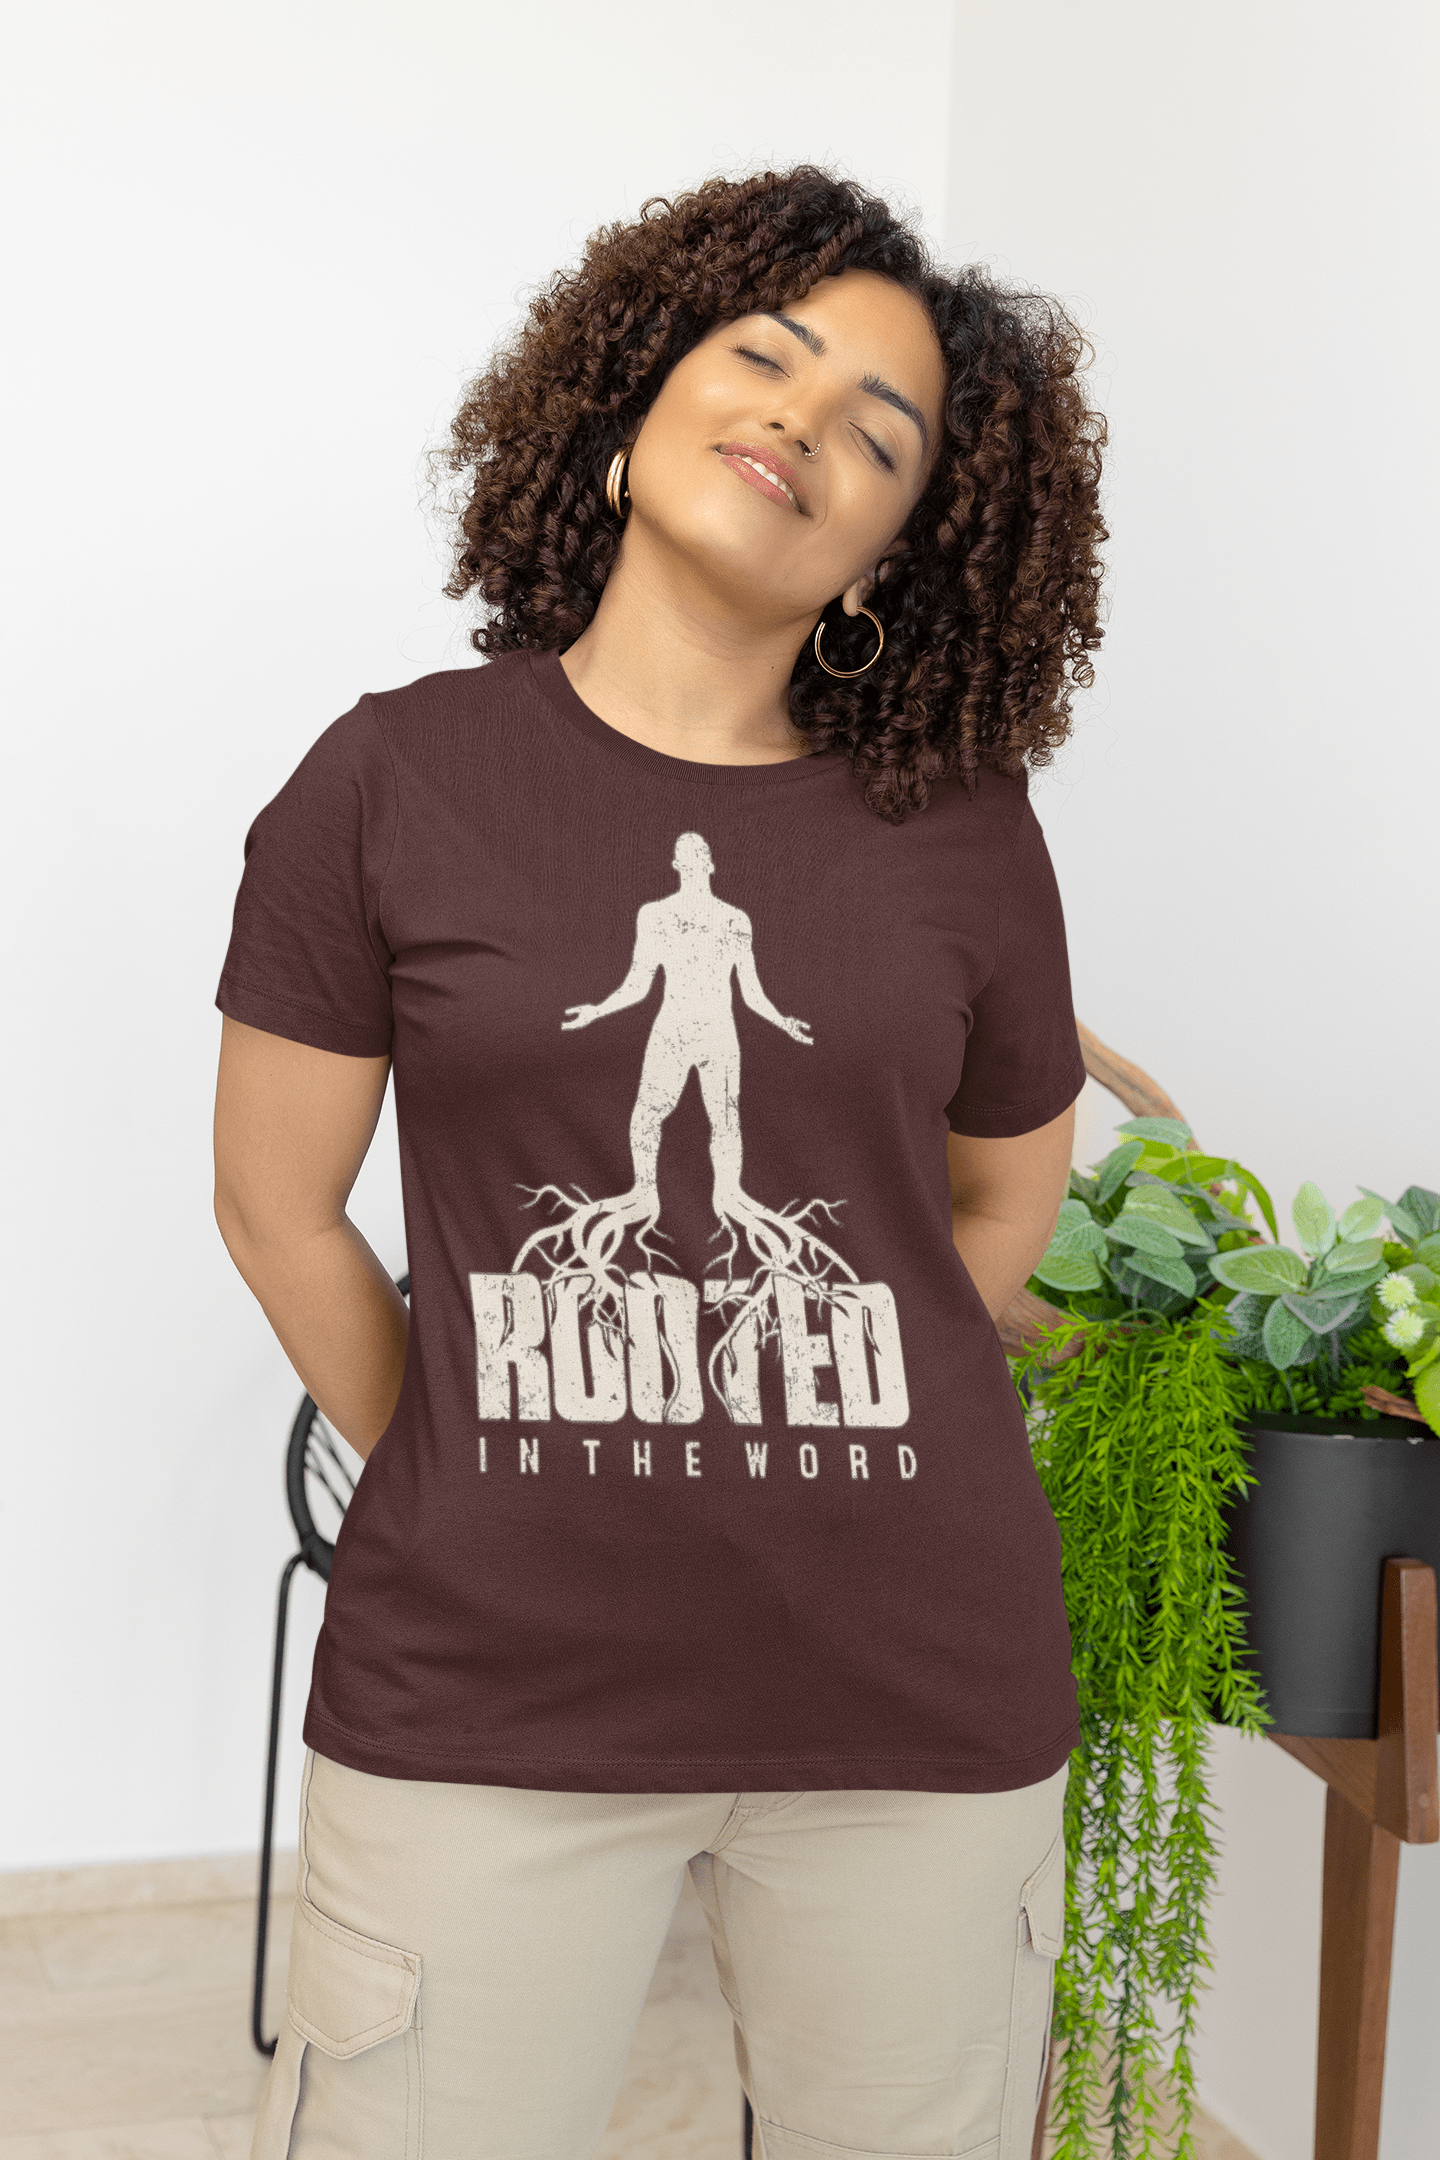 Wrighteous Wear T-Shirt Rooted in the Word Unisex Christian Tee